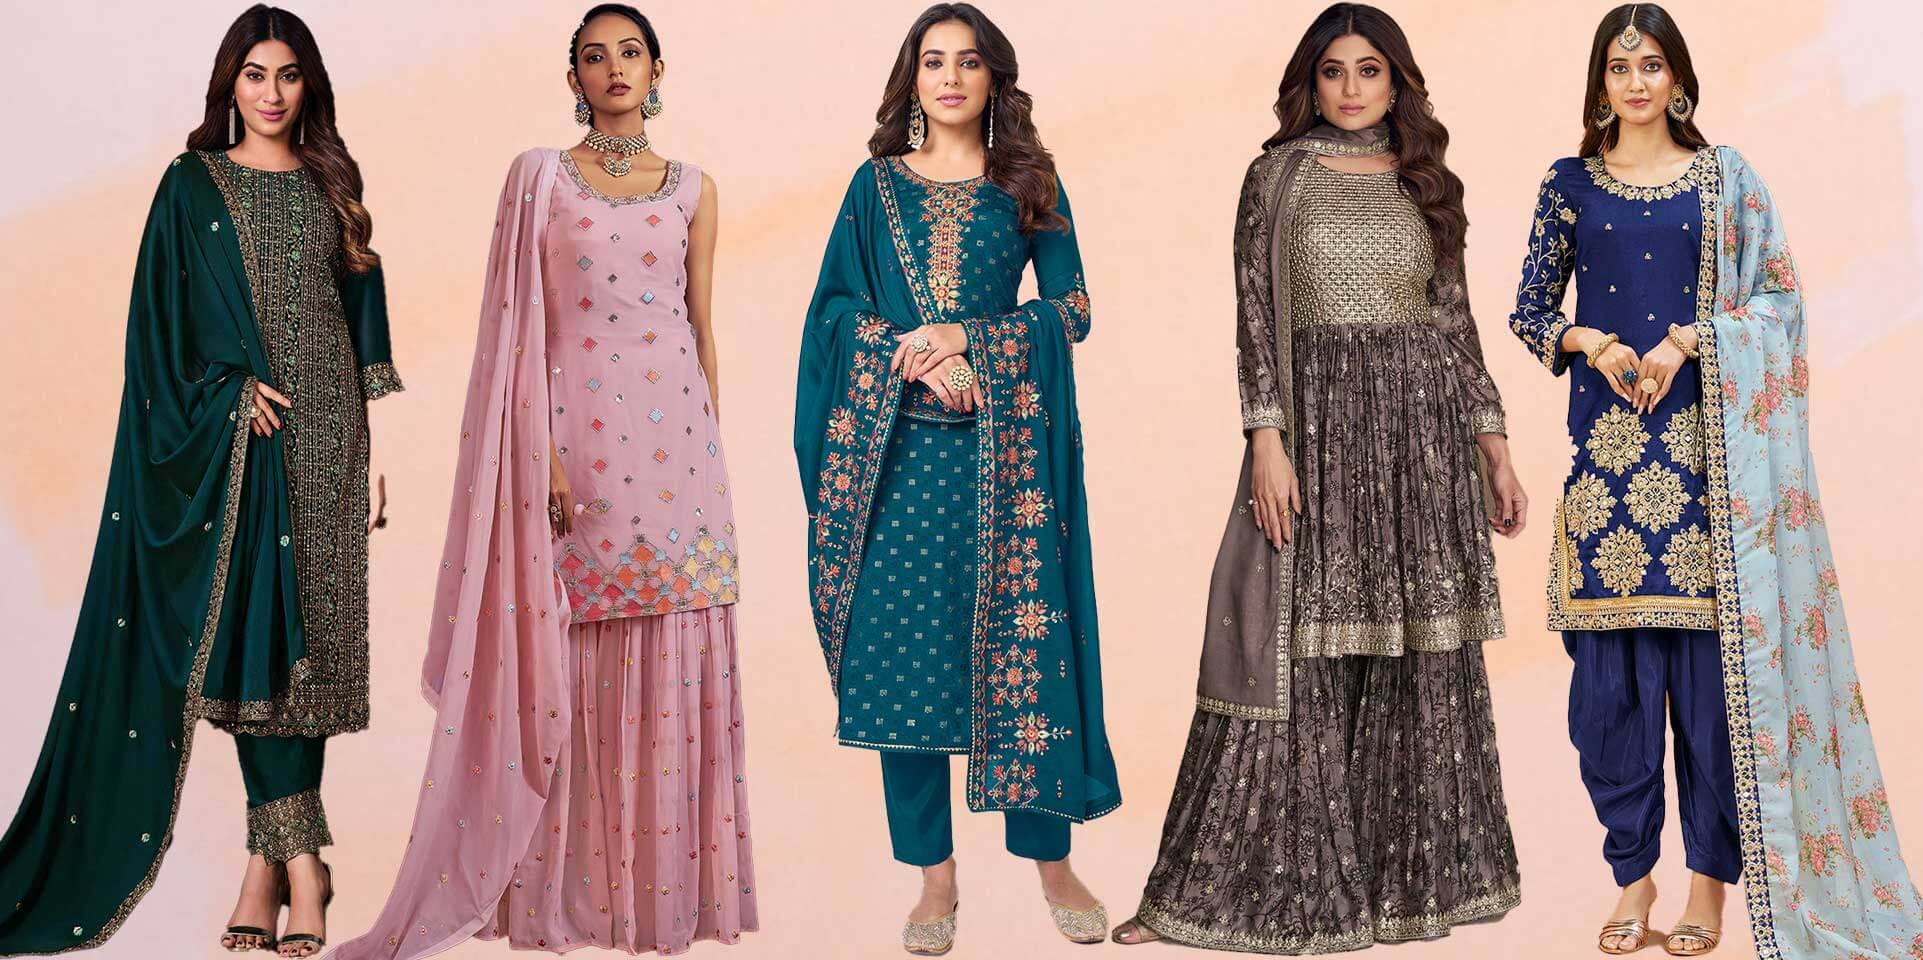 Best Ramadan Dresses for Women Shopping Guide in USA, UK, Canada and Worldwide in 2023